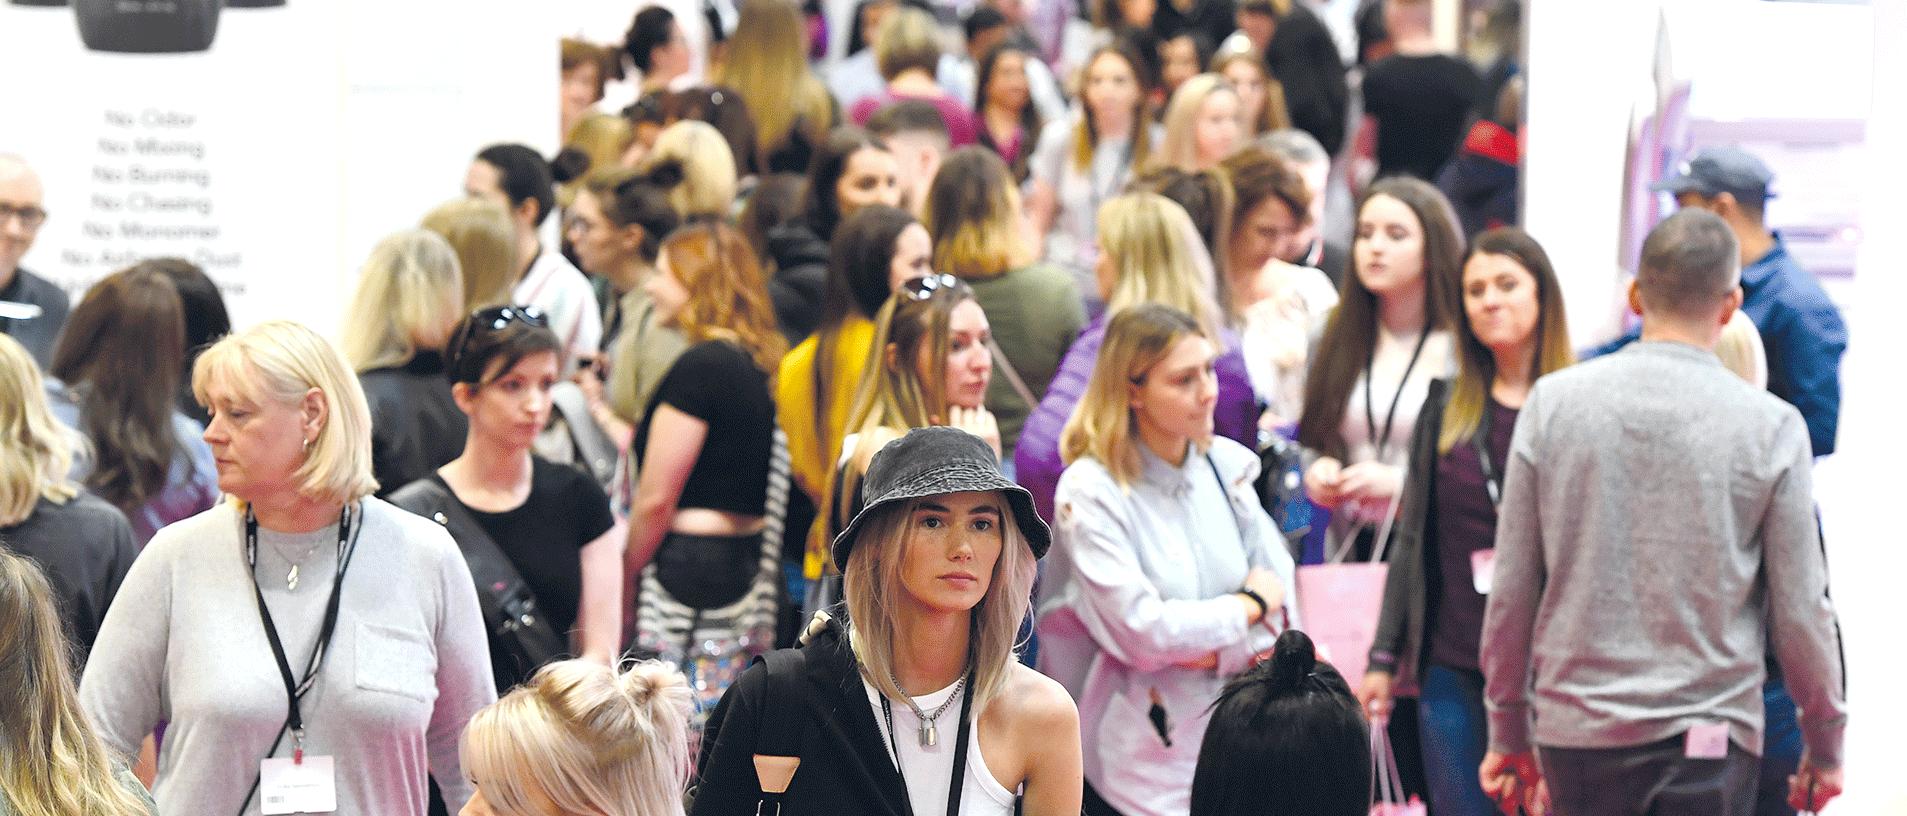 The Biggest Beauty and Christmas Shopping Event of the Year